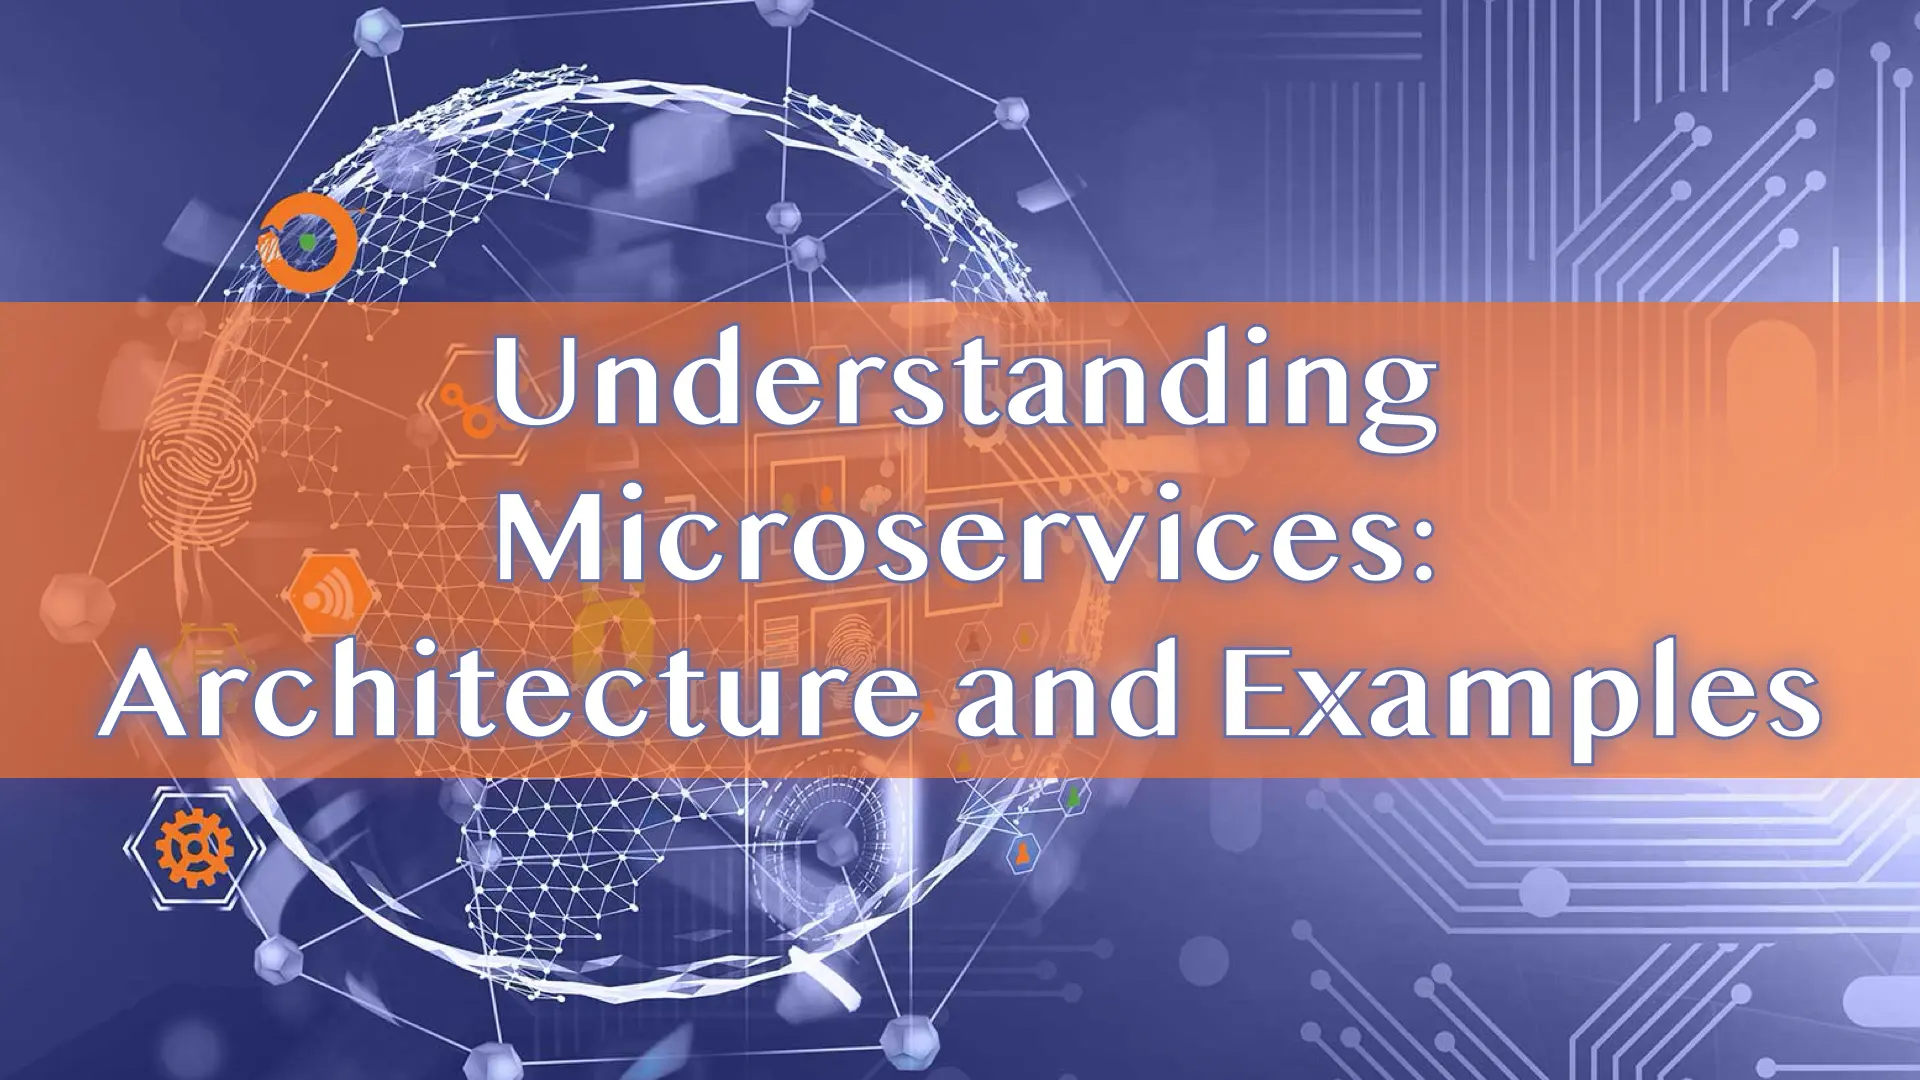 Understanding Microservices: Architecture and Examples